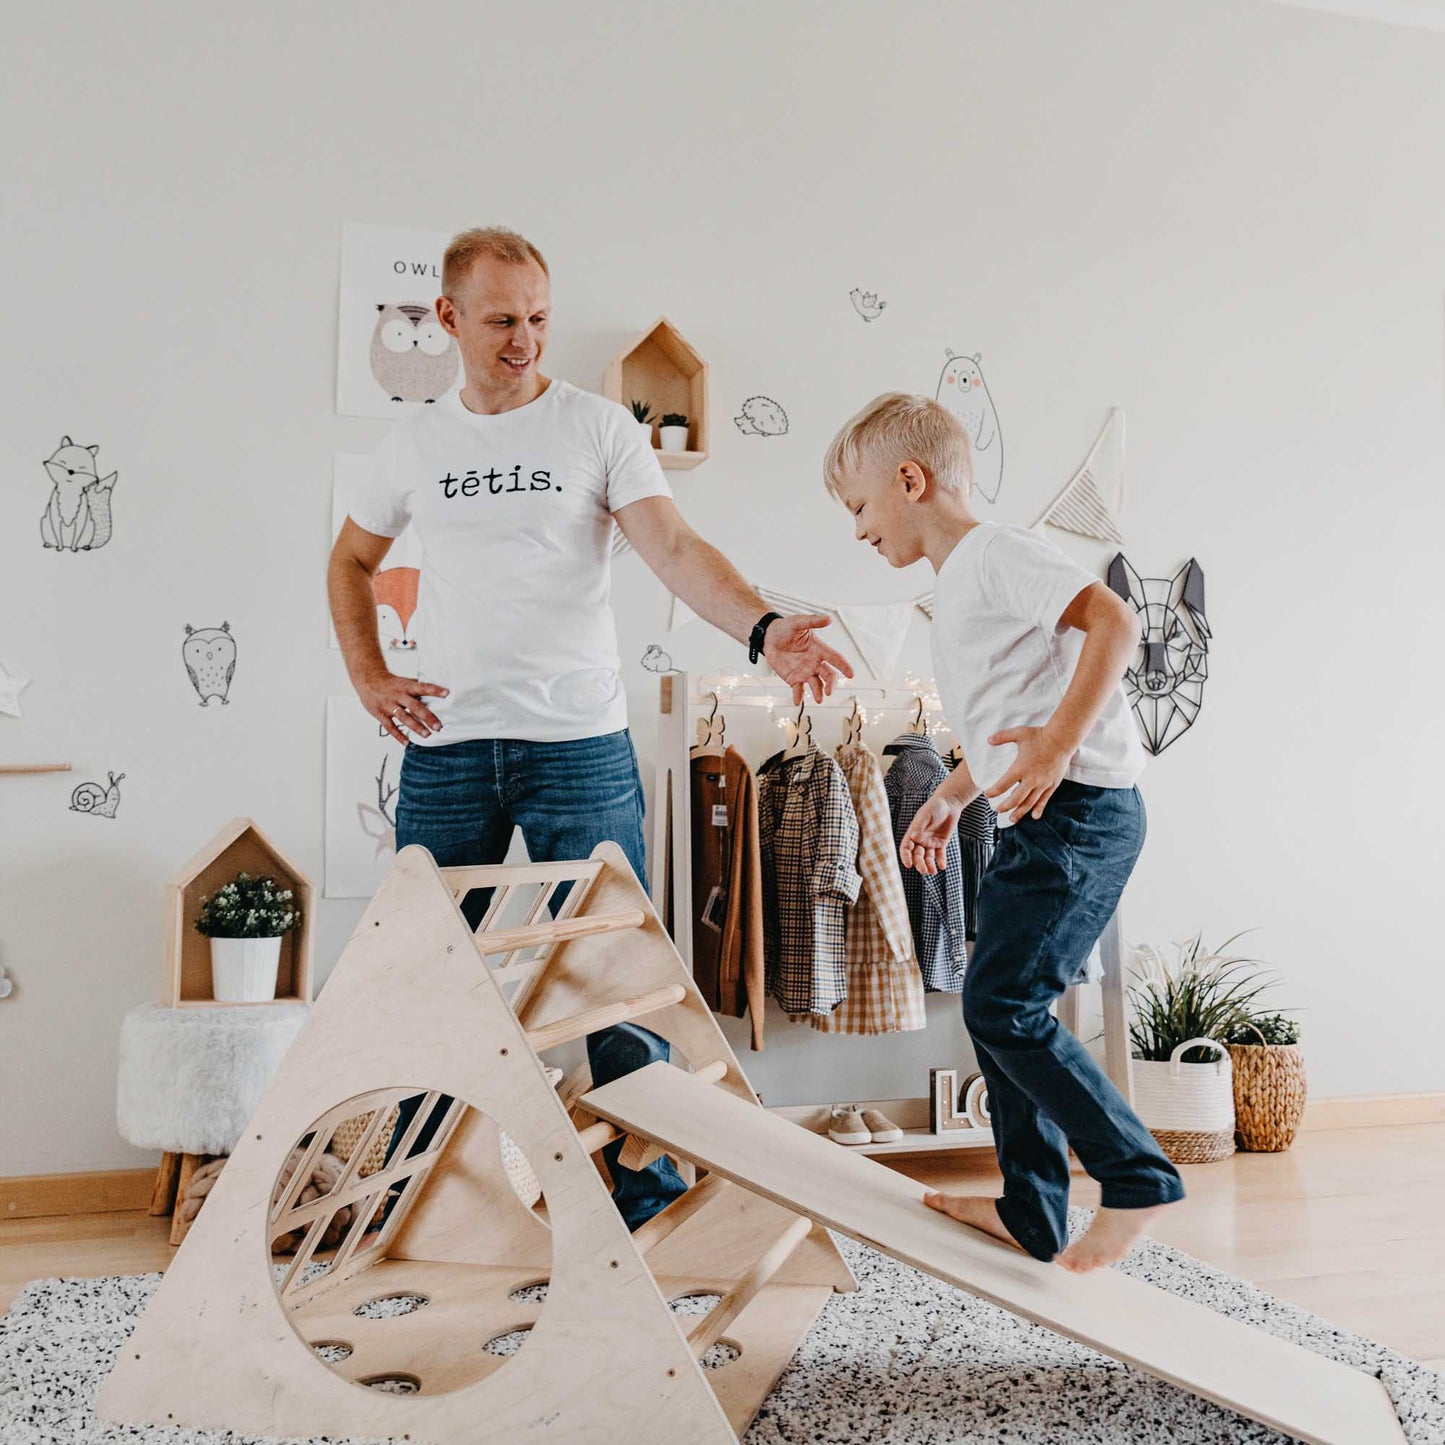 A man and his son playing with a Climbing triangle + Transformable climbing gym + a ramp in a room.